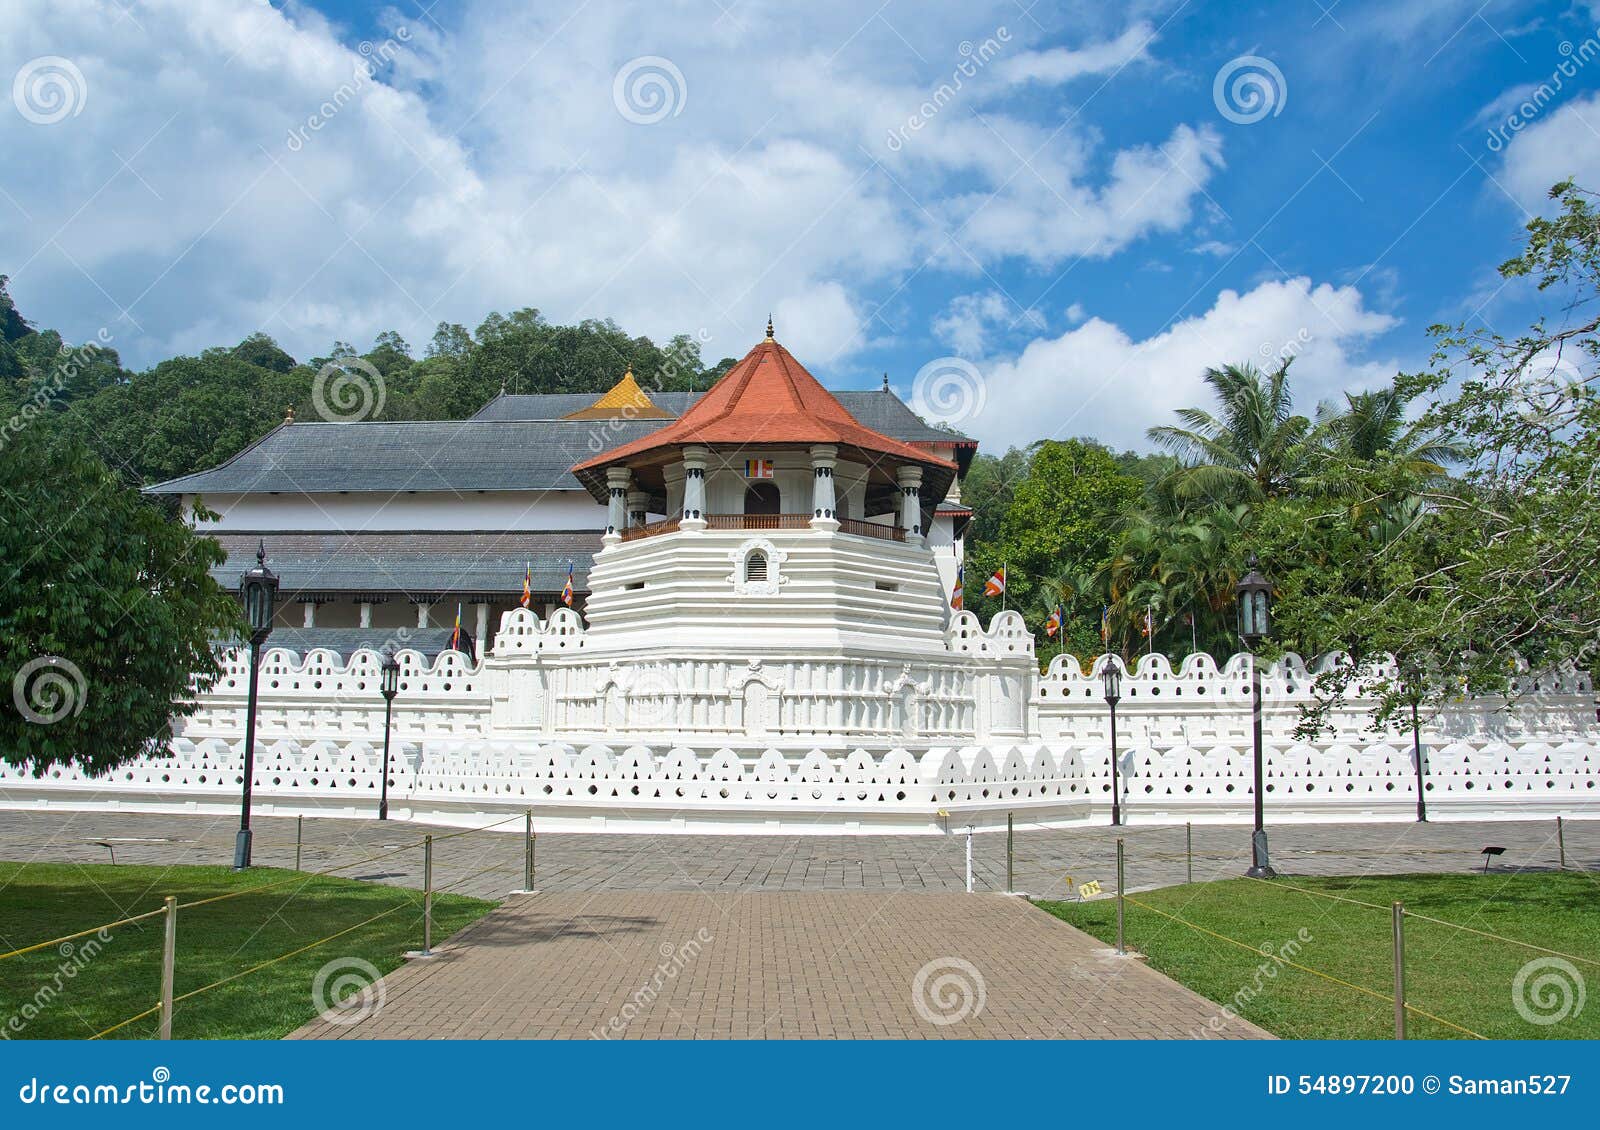 temple of the sacred tooth relic, kandy sri lanka